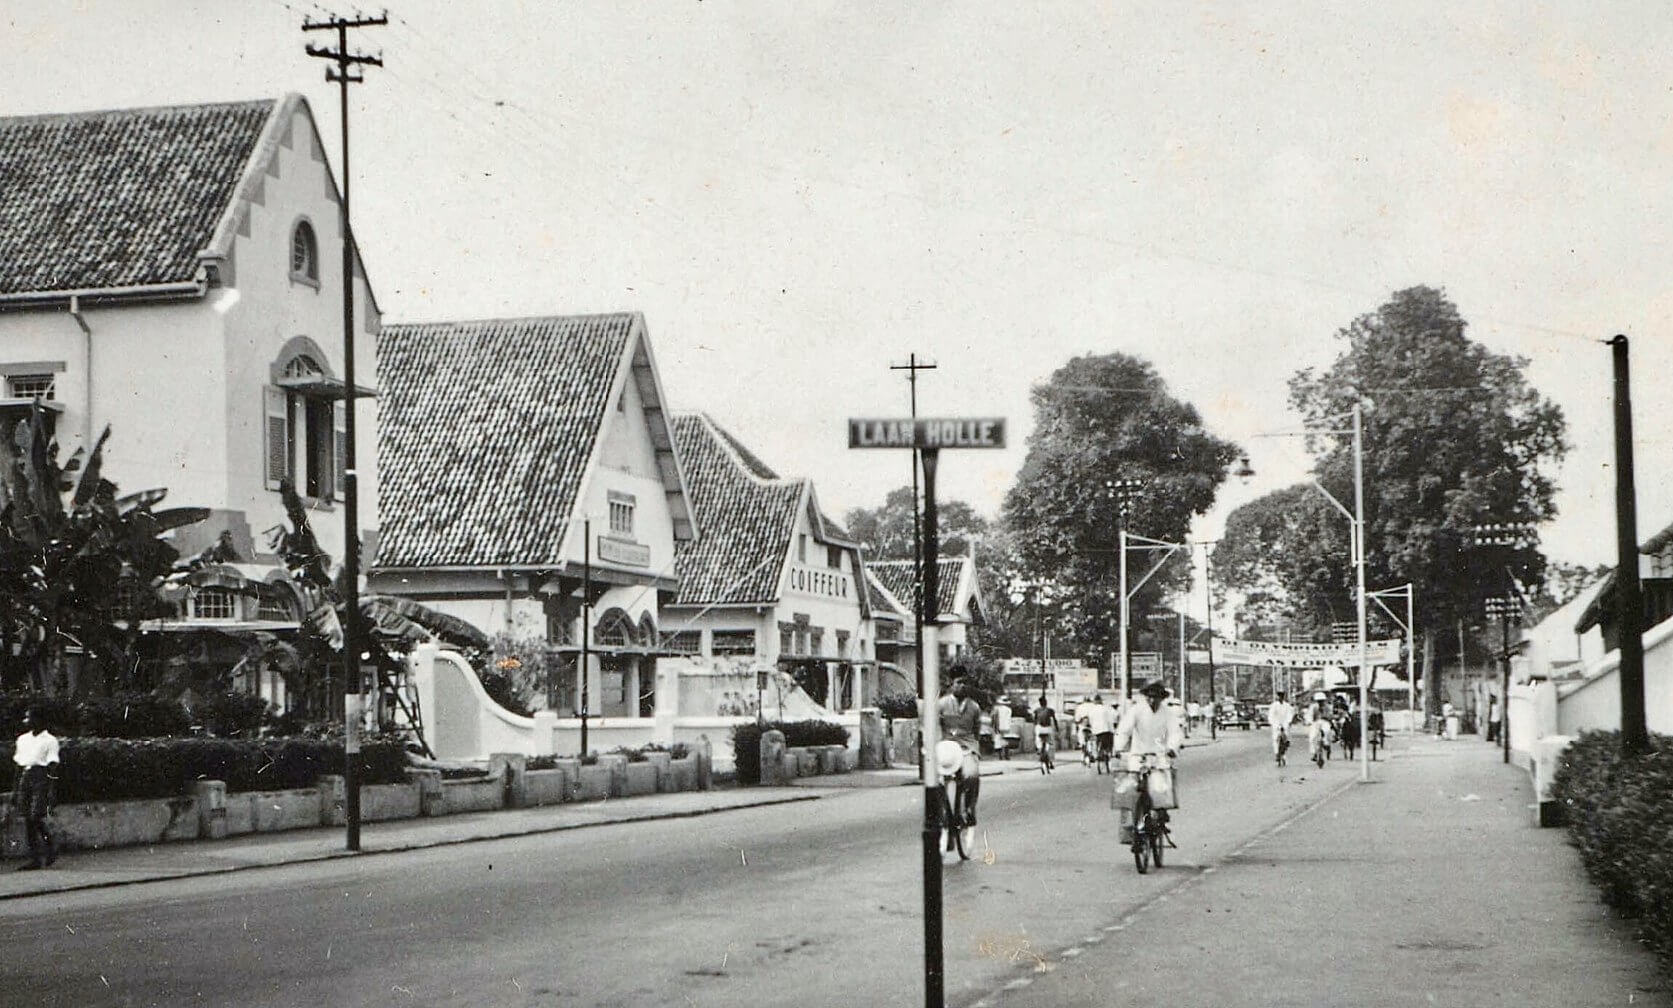 The street that beforehand was known as Laan Holle (Holle Lane)